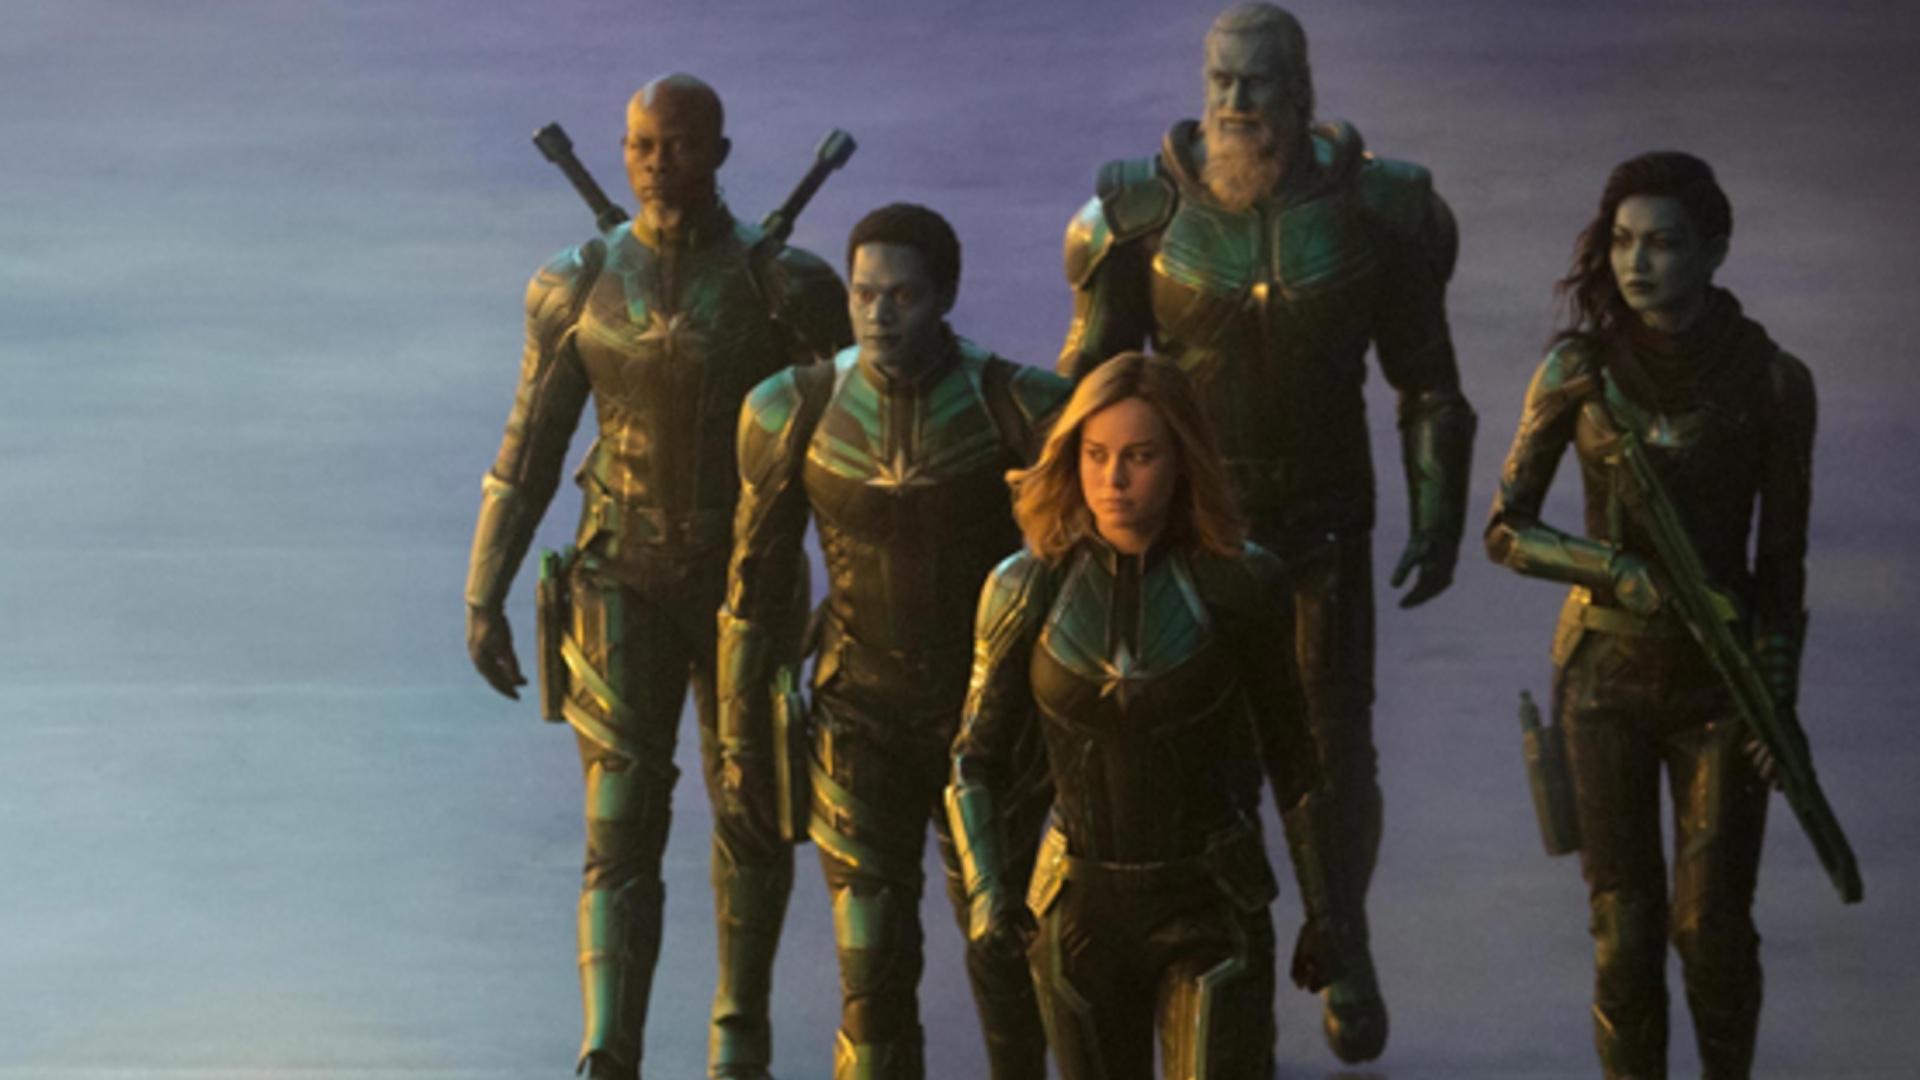 New CAPTAIN MARVEL Photo Give Us a Closeup Look at the Noble